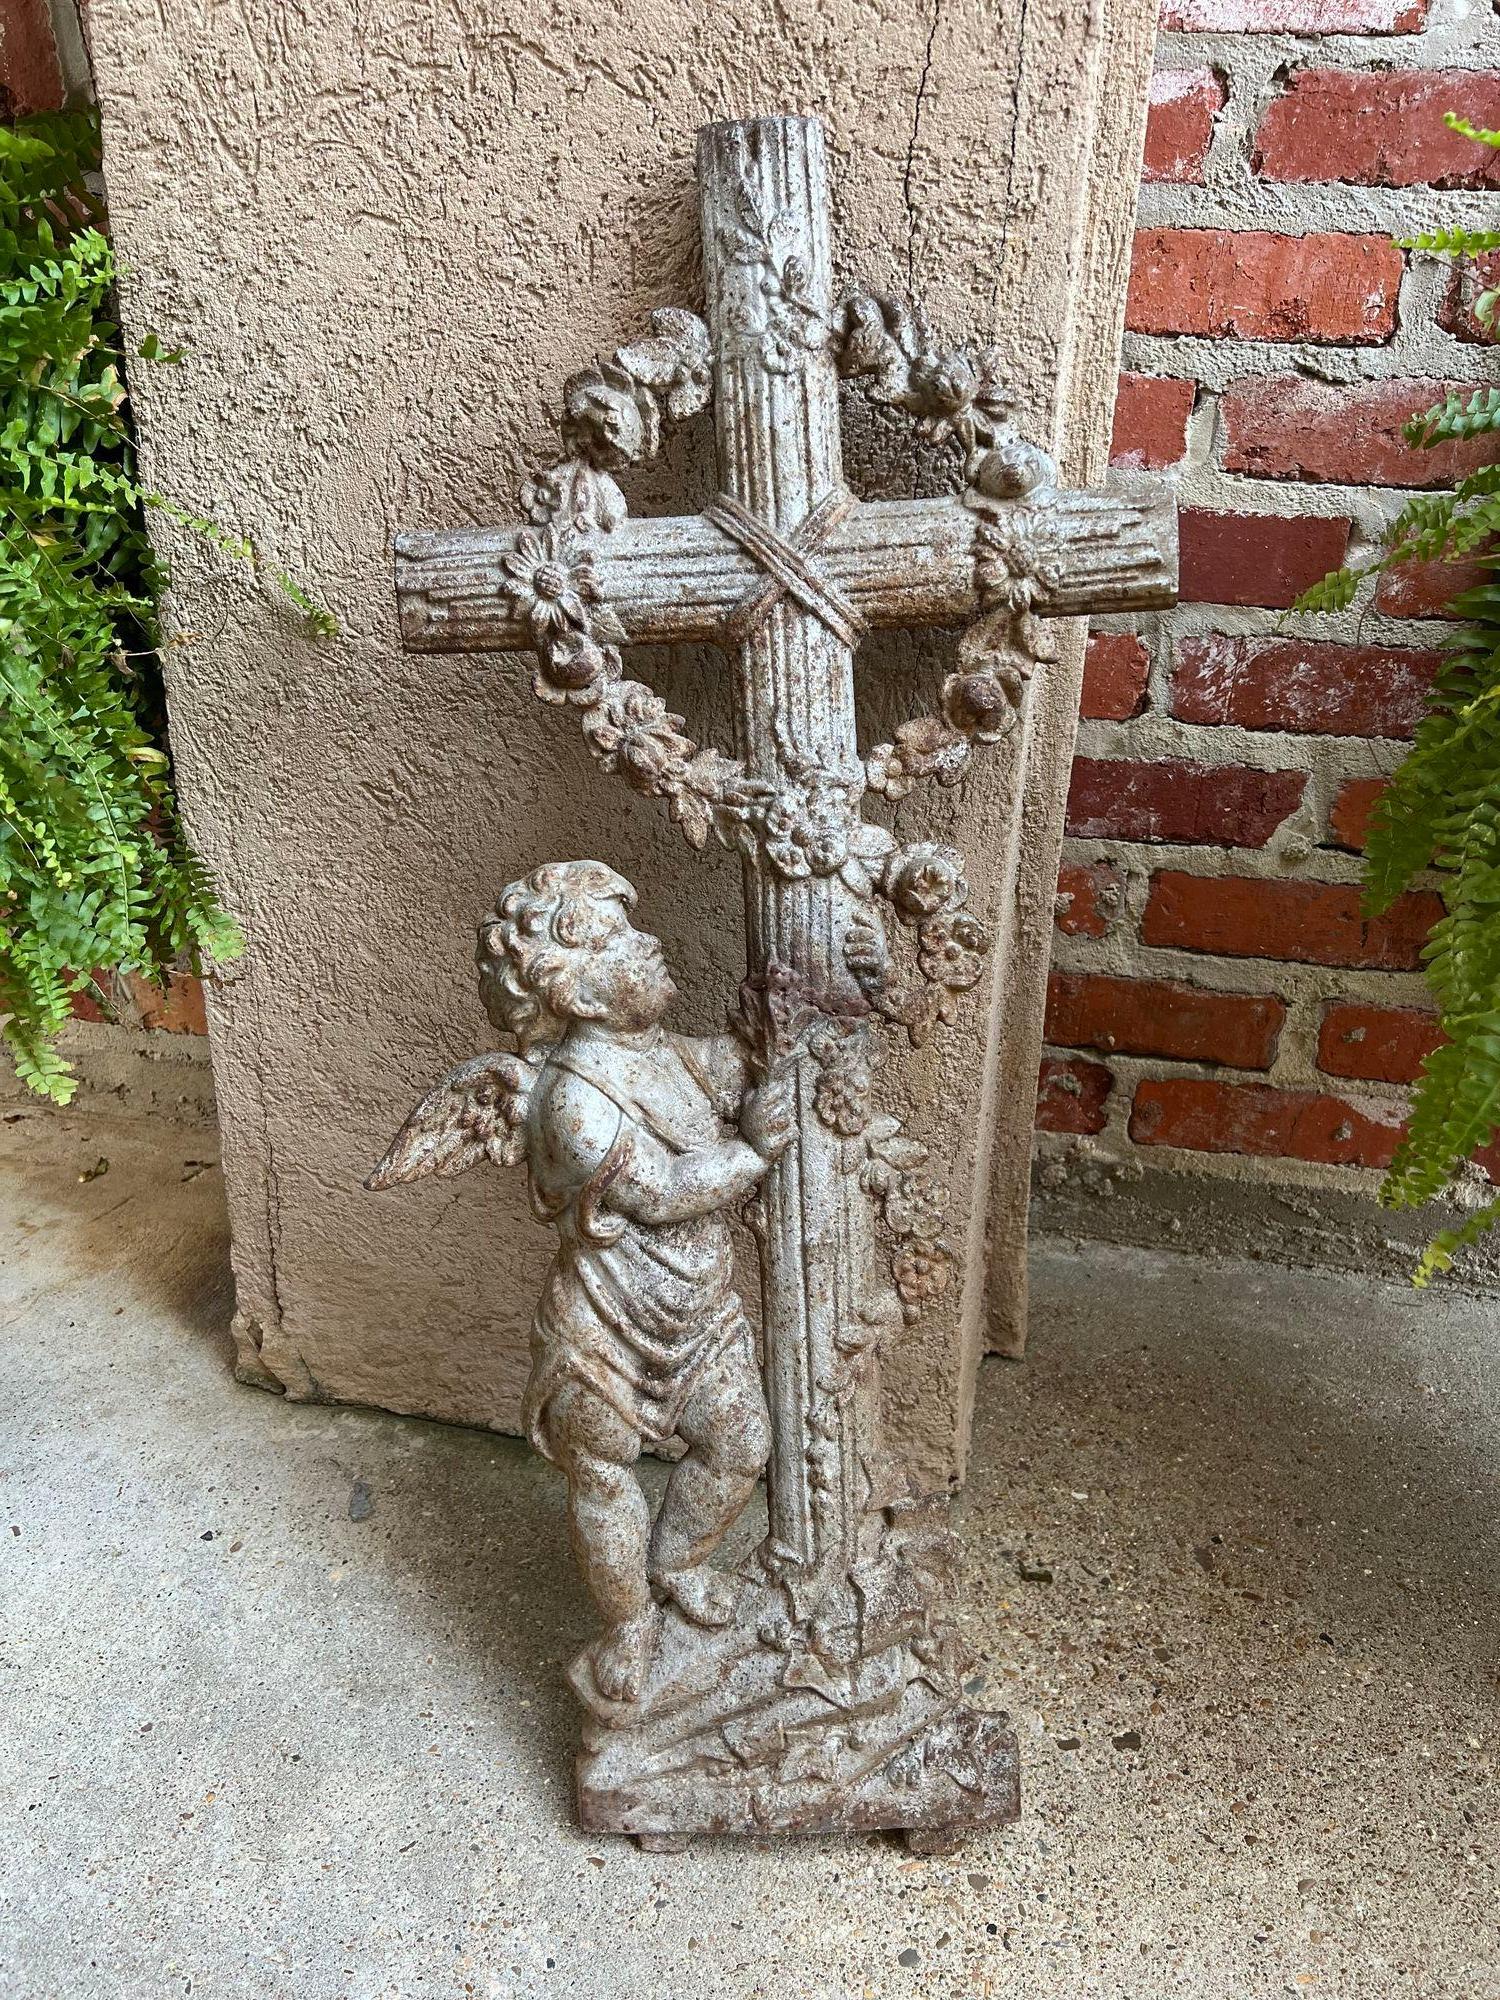 SMALL Antique French Cast Iron Cemetery Cross Crucifix Child Angel Garden Chapel.

Direct from France, a beautiful antique French cast-iron cemetery cross, in a SMALL SIZE with fabulous details throughout, including a full figure angel/cherub with